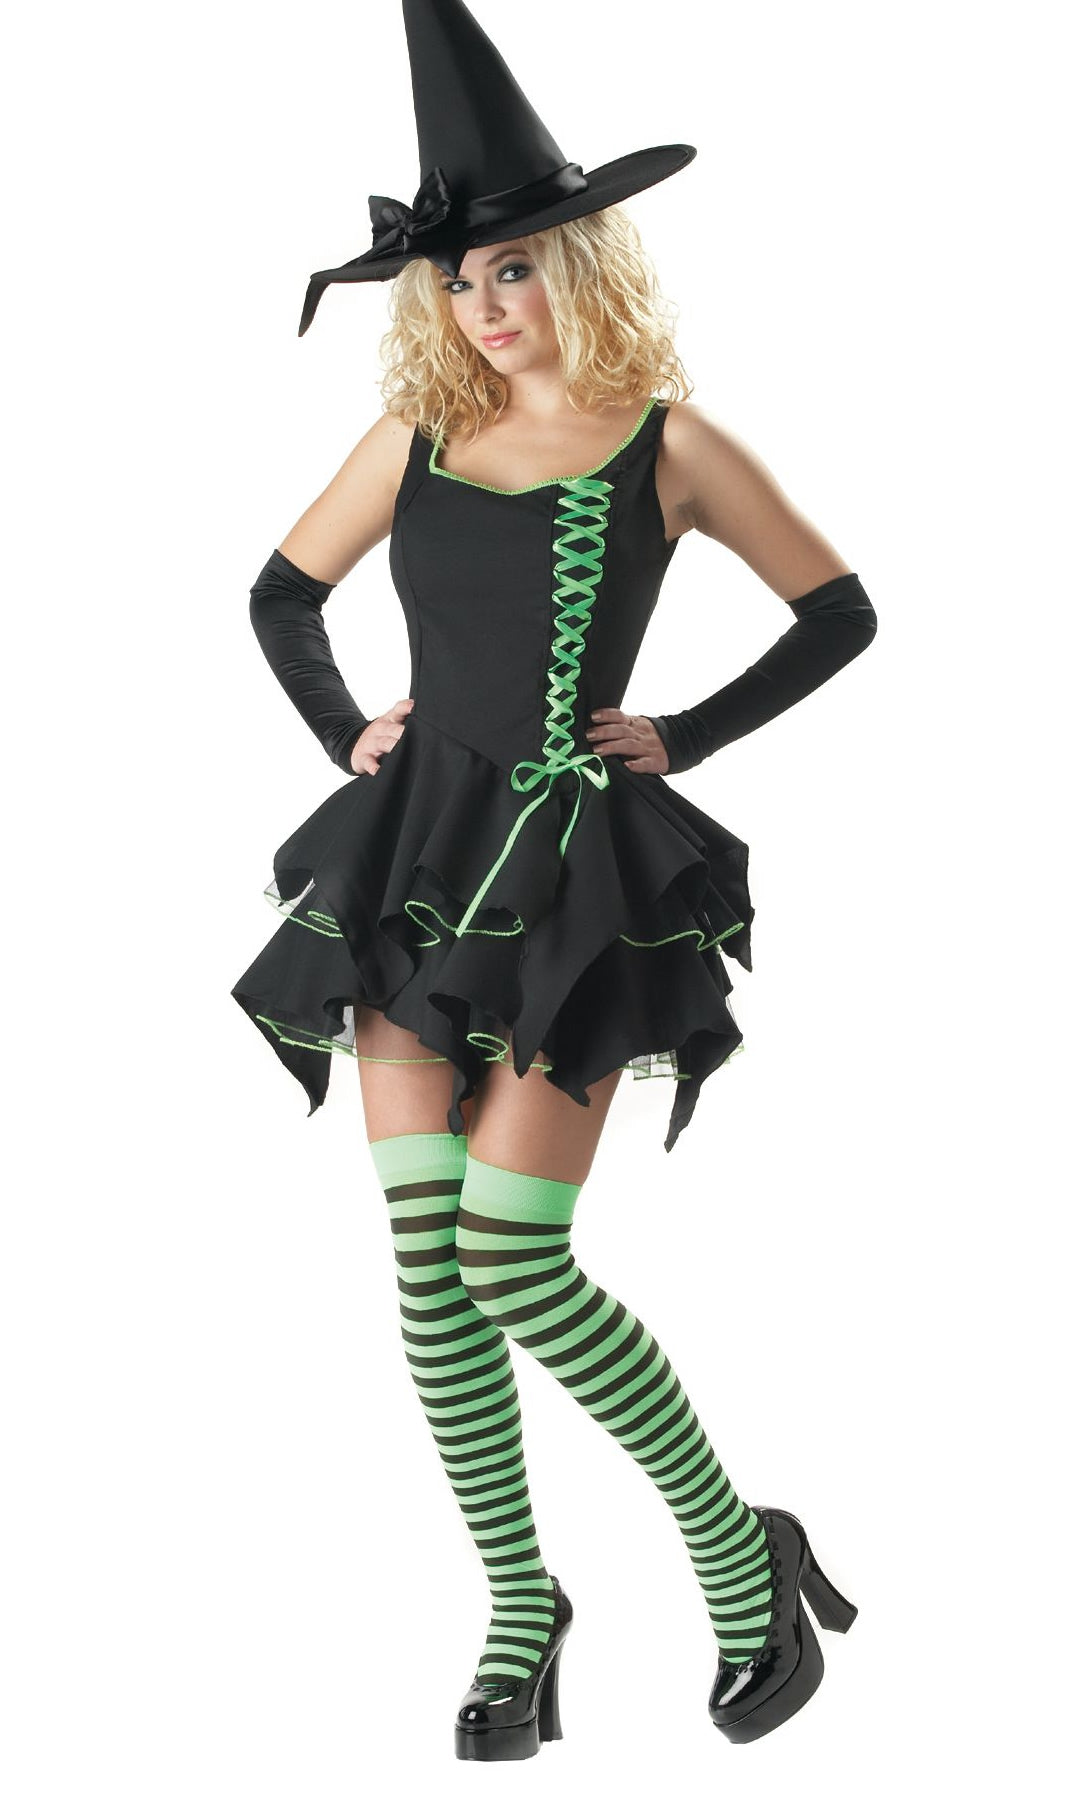 Short black with dress with green trim, gloves and hat